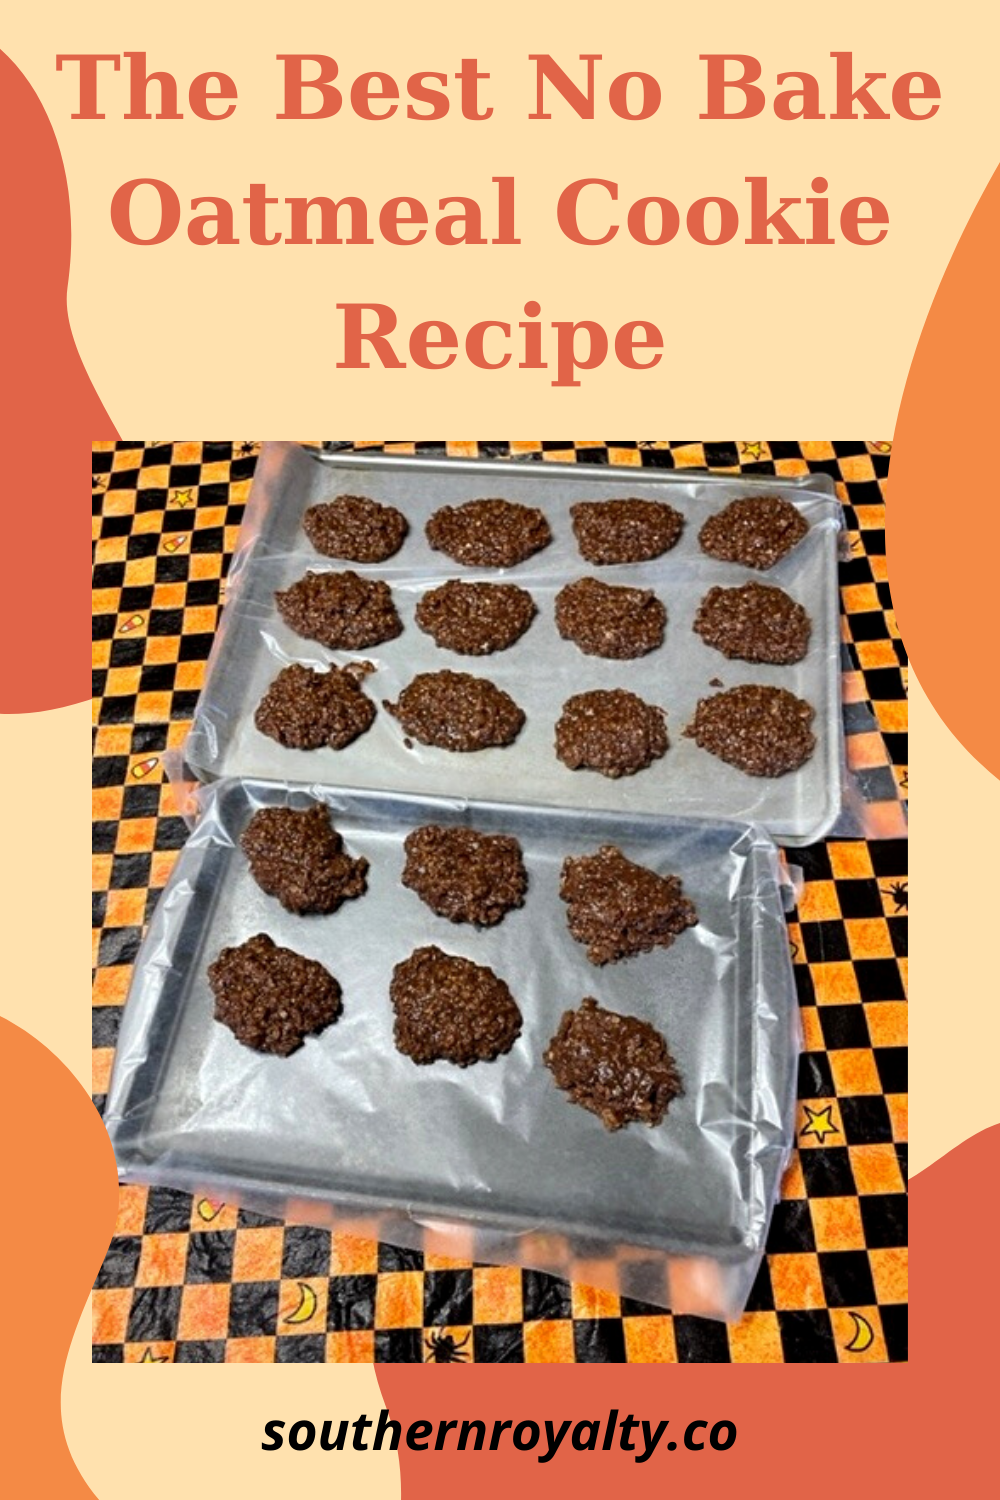 Quick and easy no bake oatmeal cookie recipe